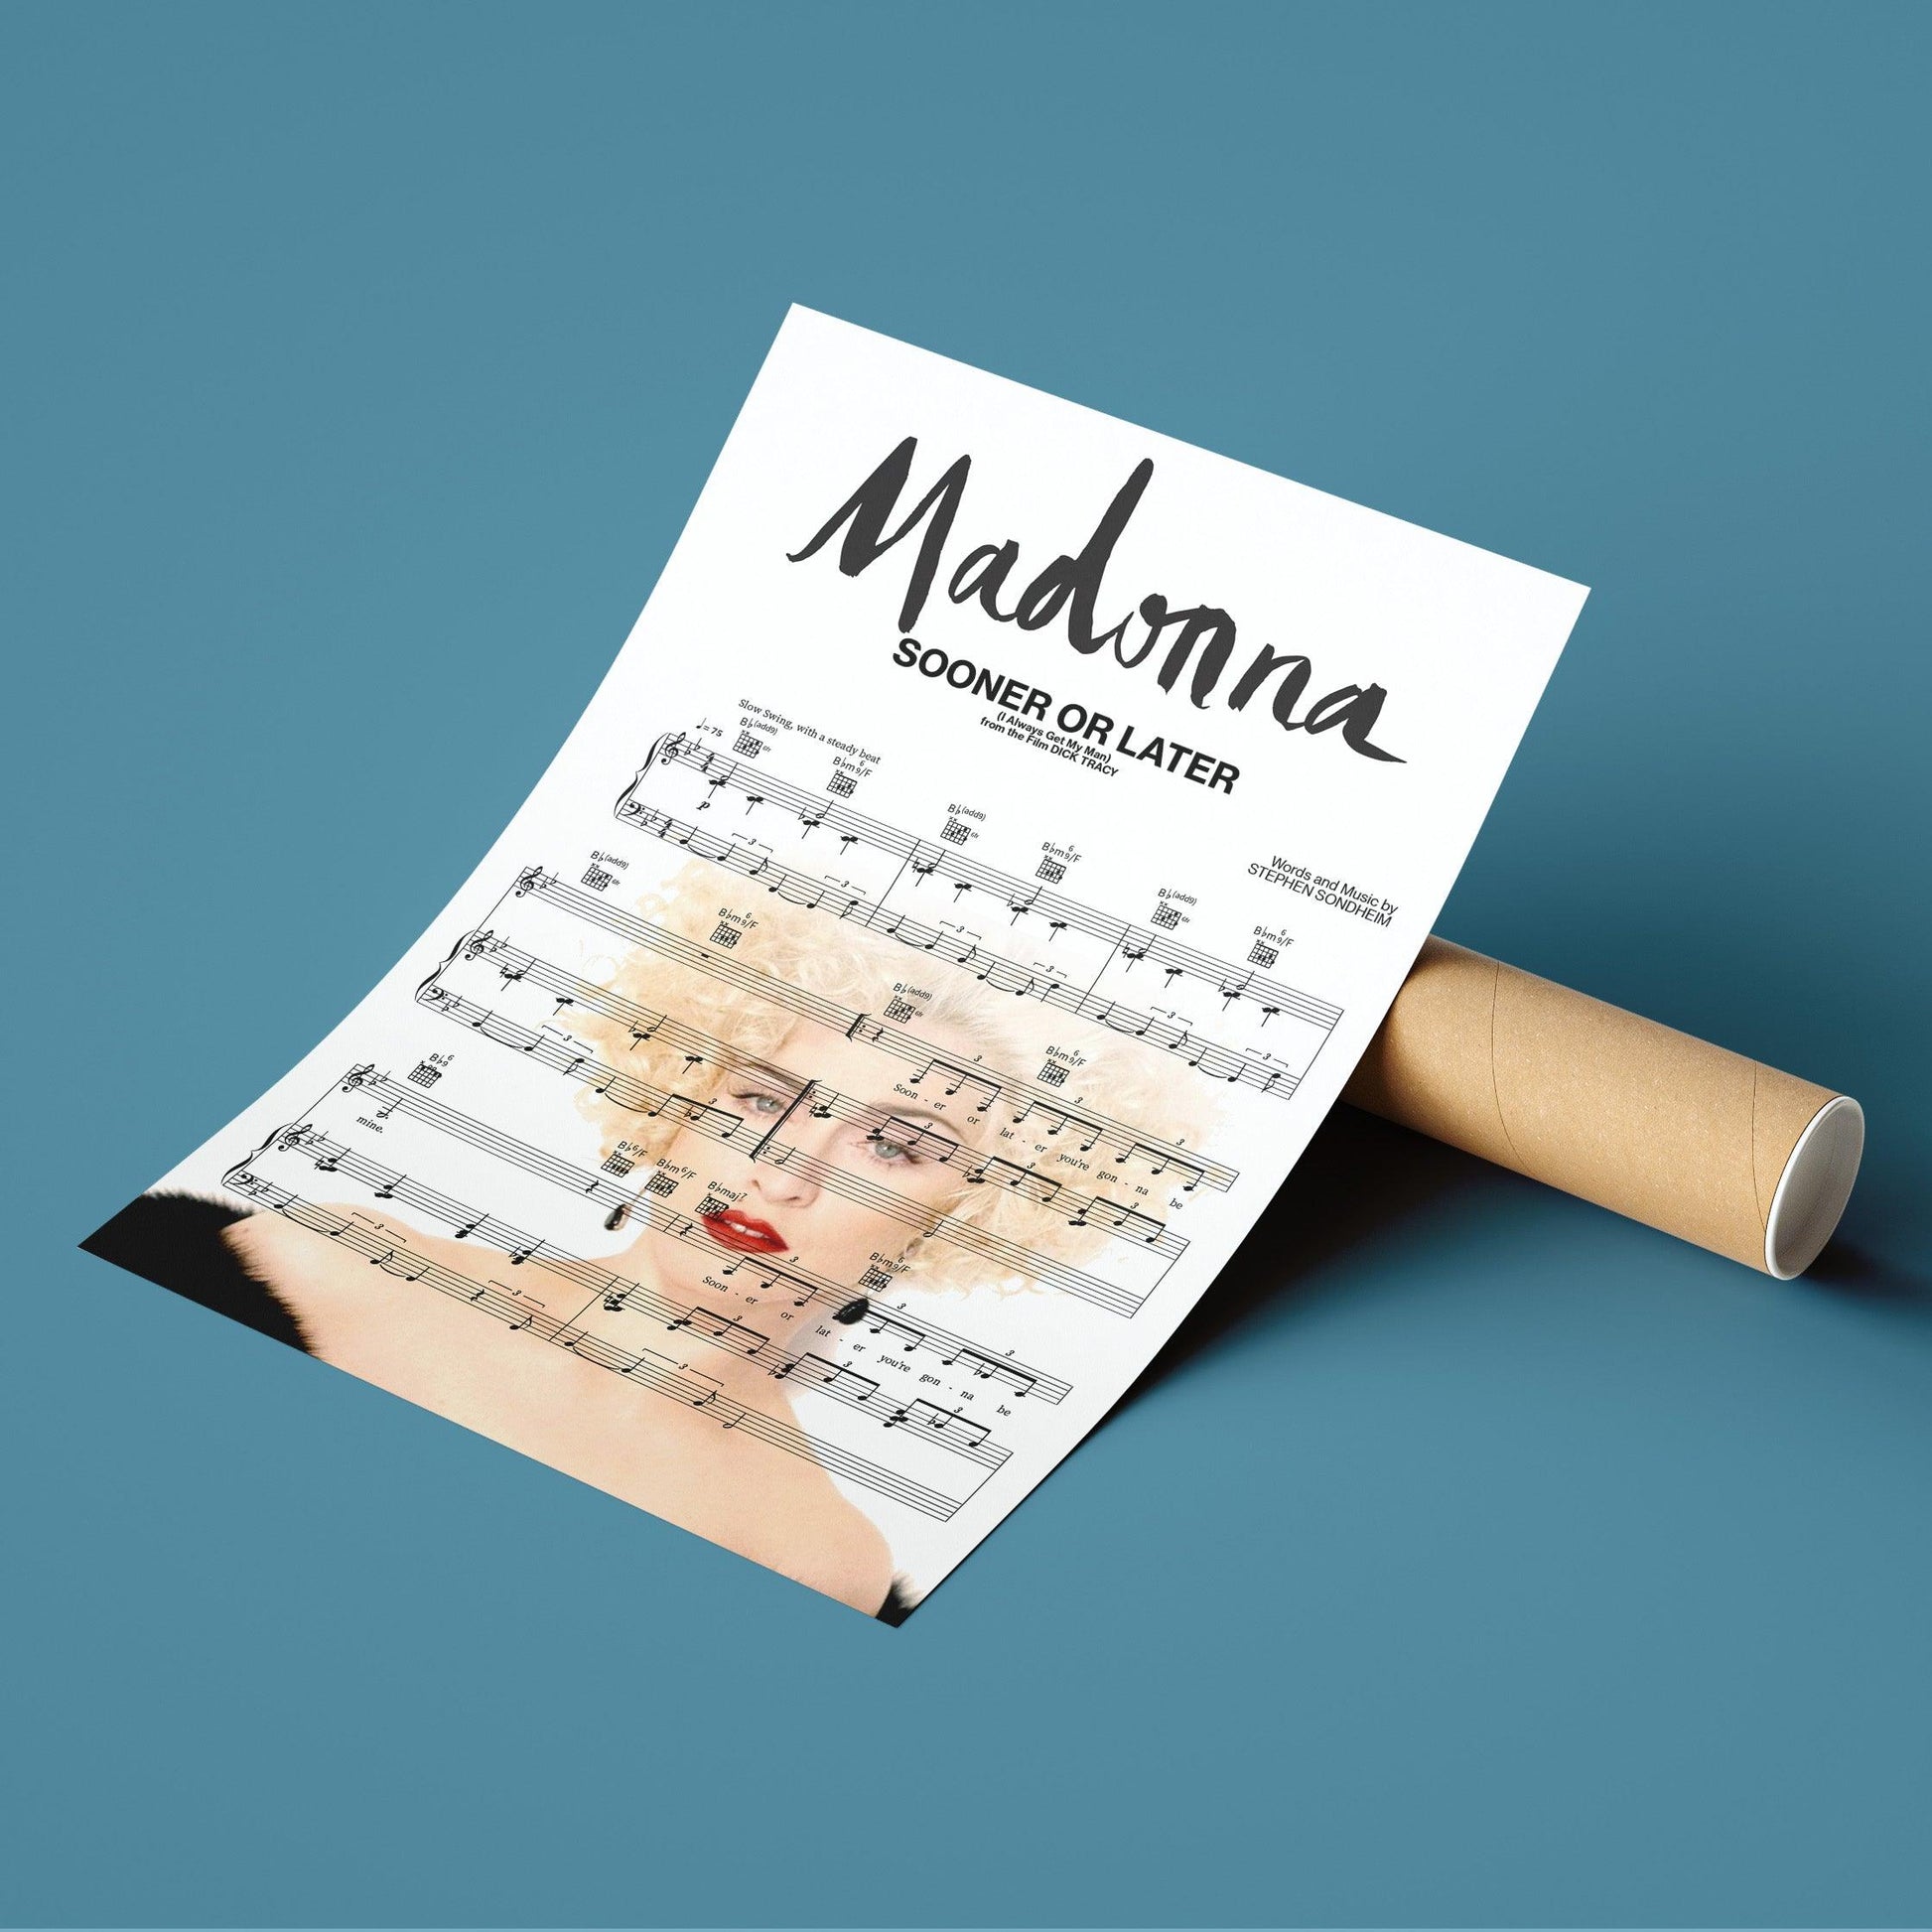 Madonna - Sooner or Later  Song Print | Song Music Sheet Notes Print Everyone has a favorite song especially Madonna Print, and now you can show the score as printed staff. The personal favorite song sheet print shows the song chosen as the score. 